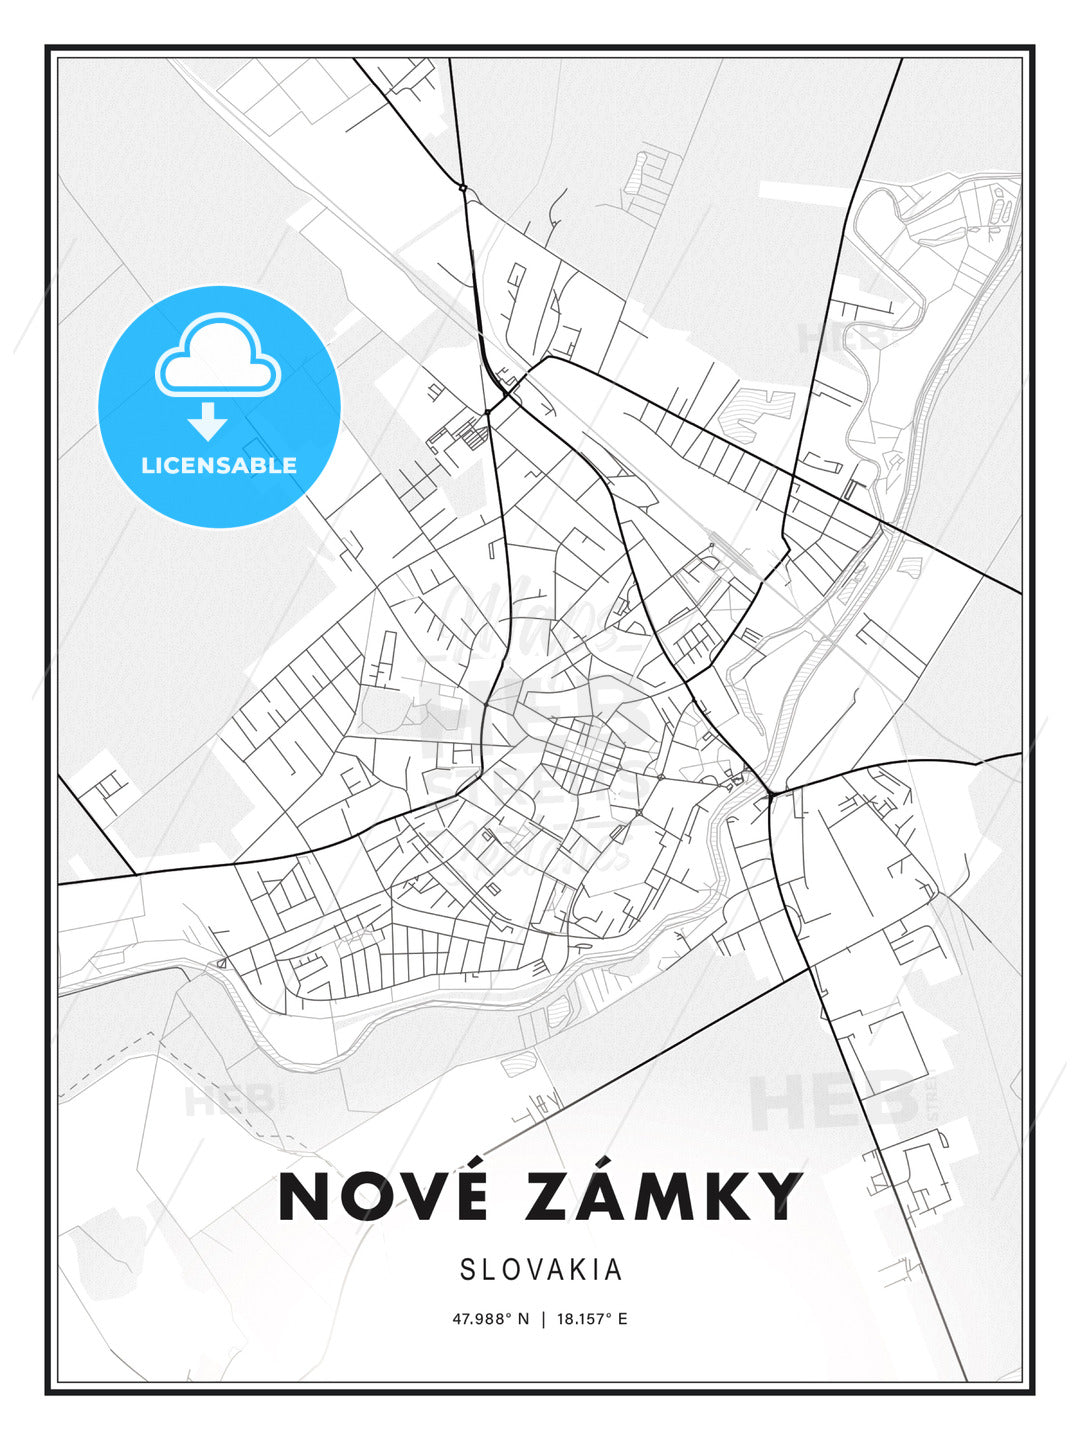 Nové Zámky, Slovakia, Modern Print Template in Various Formats - HEBSTREITS Sketches